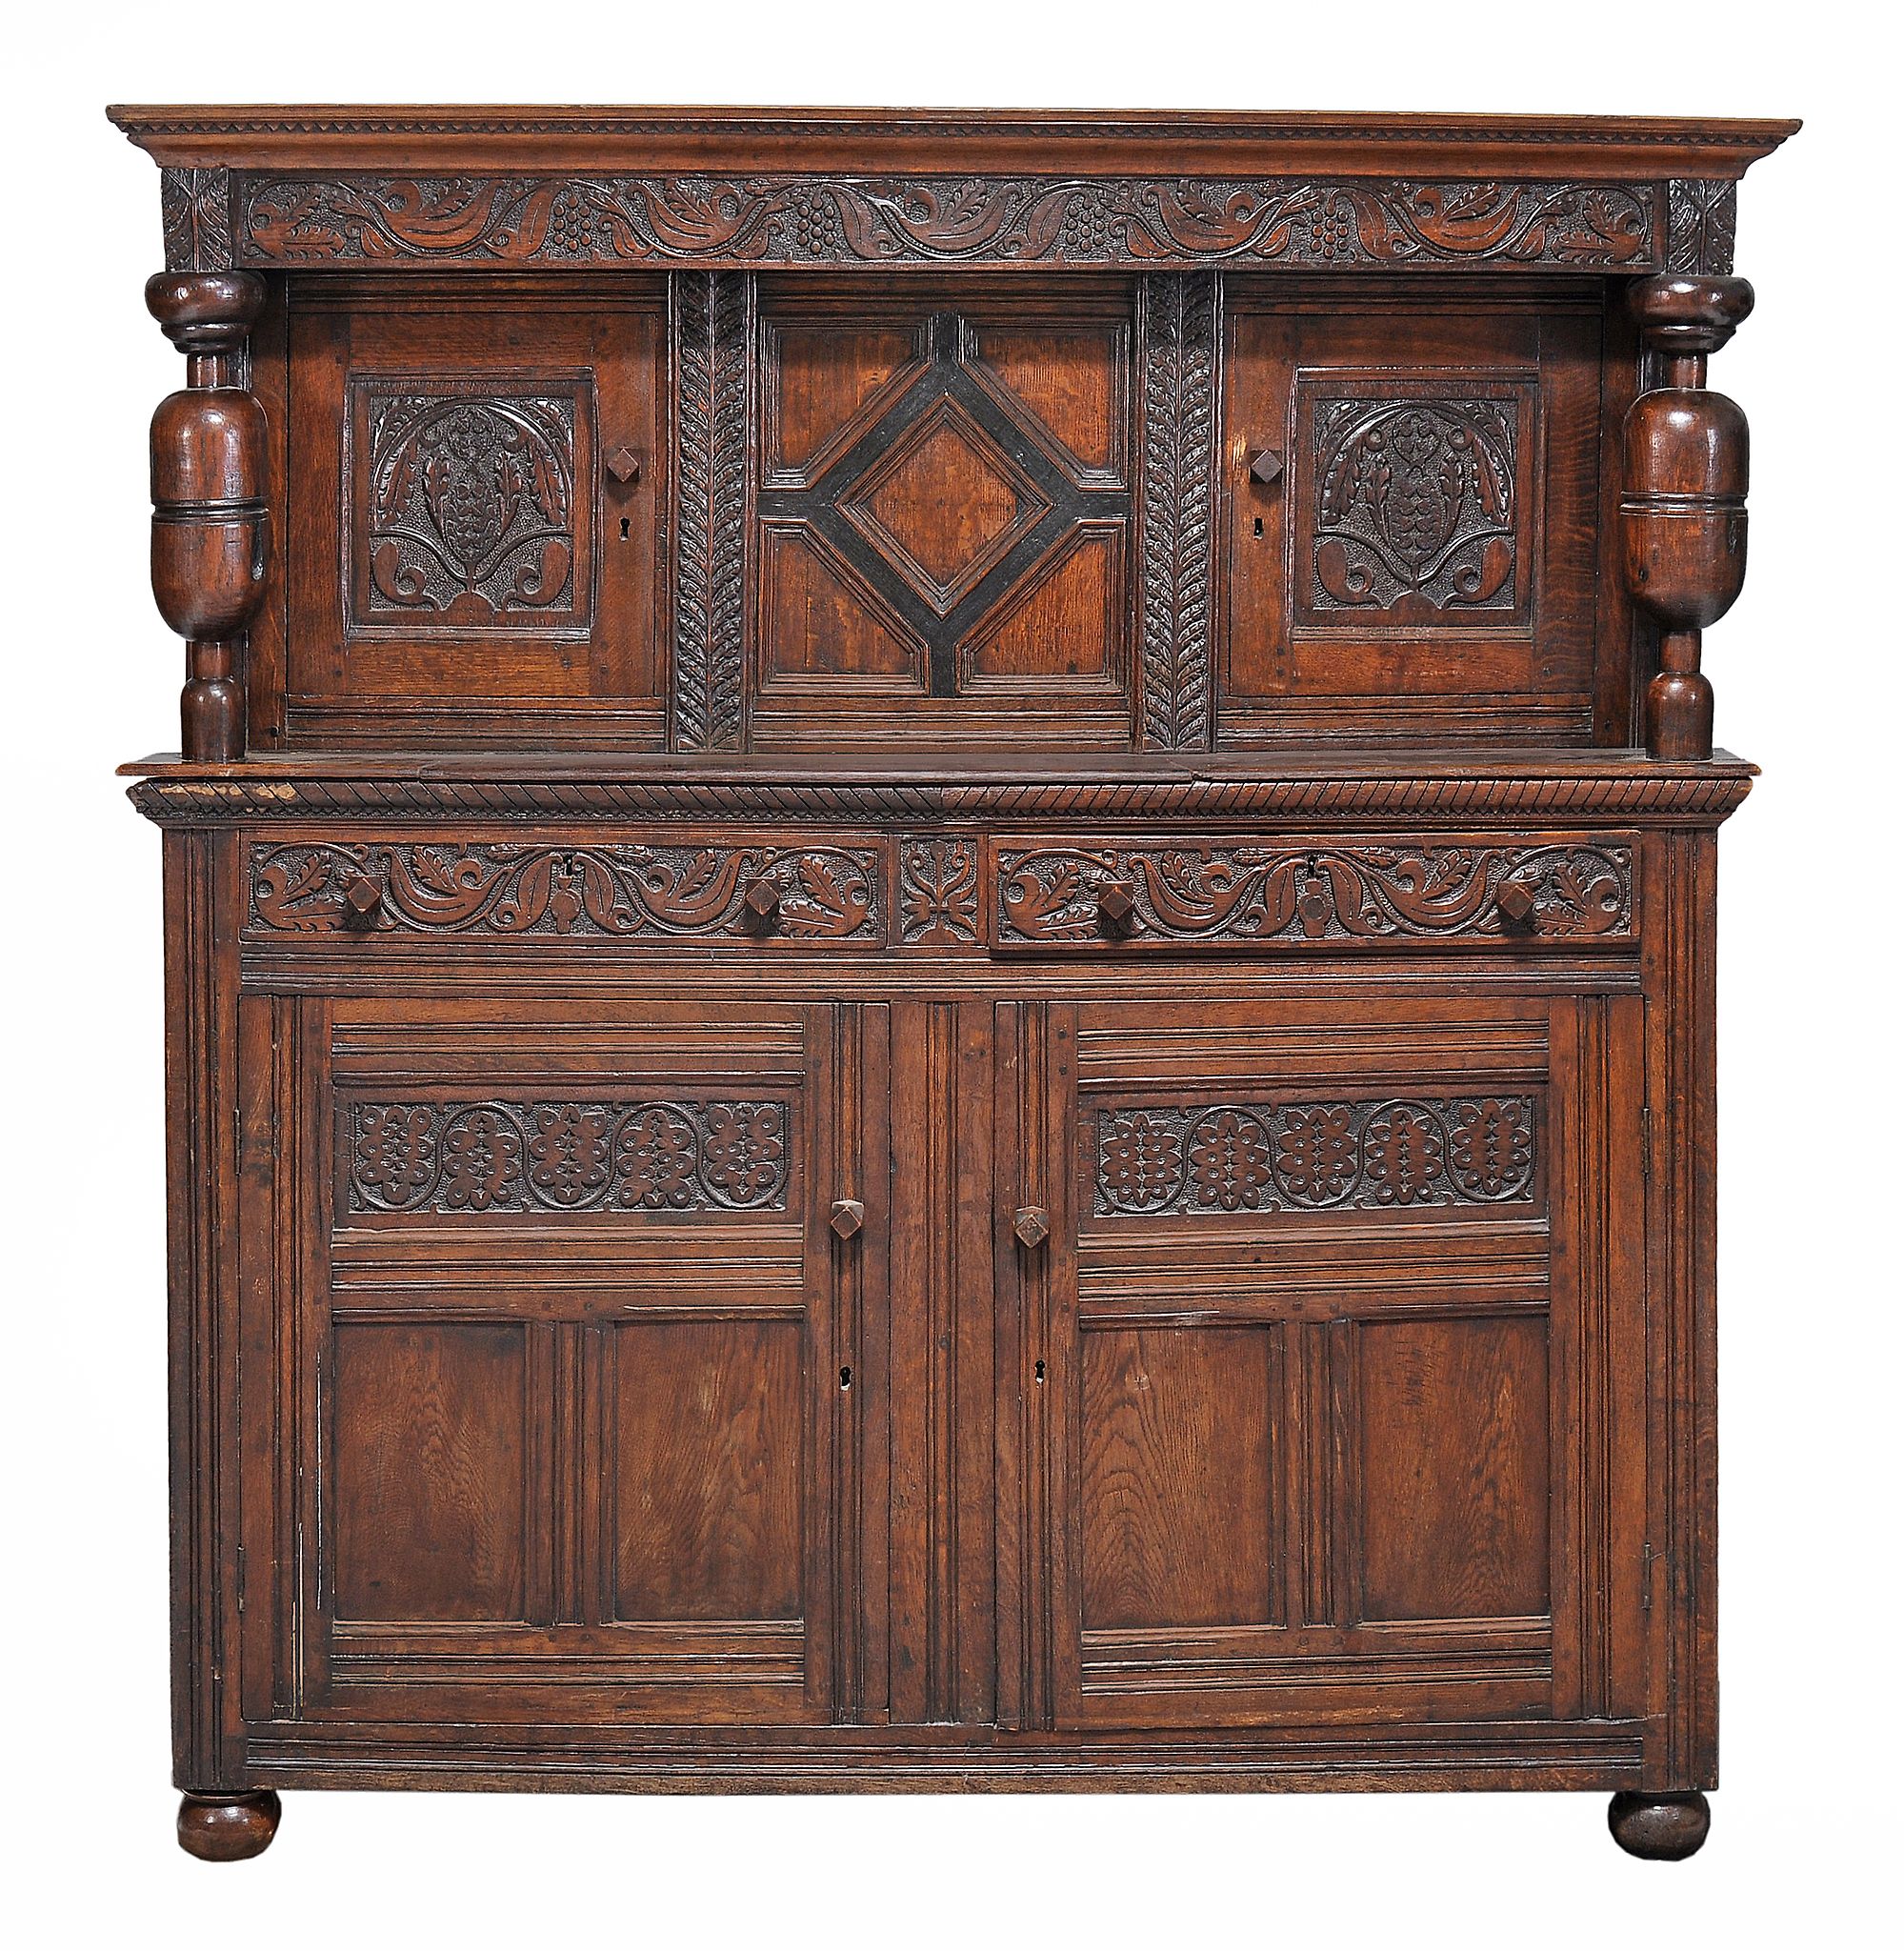 A carved oak court cabinet , 17th century and later  A carved oak court cabinet  , 17th century